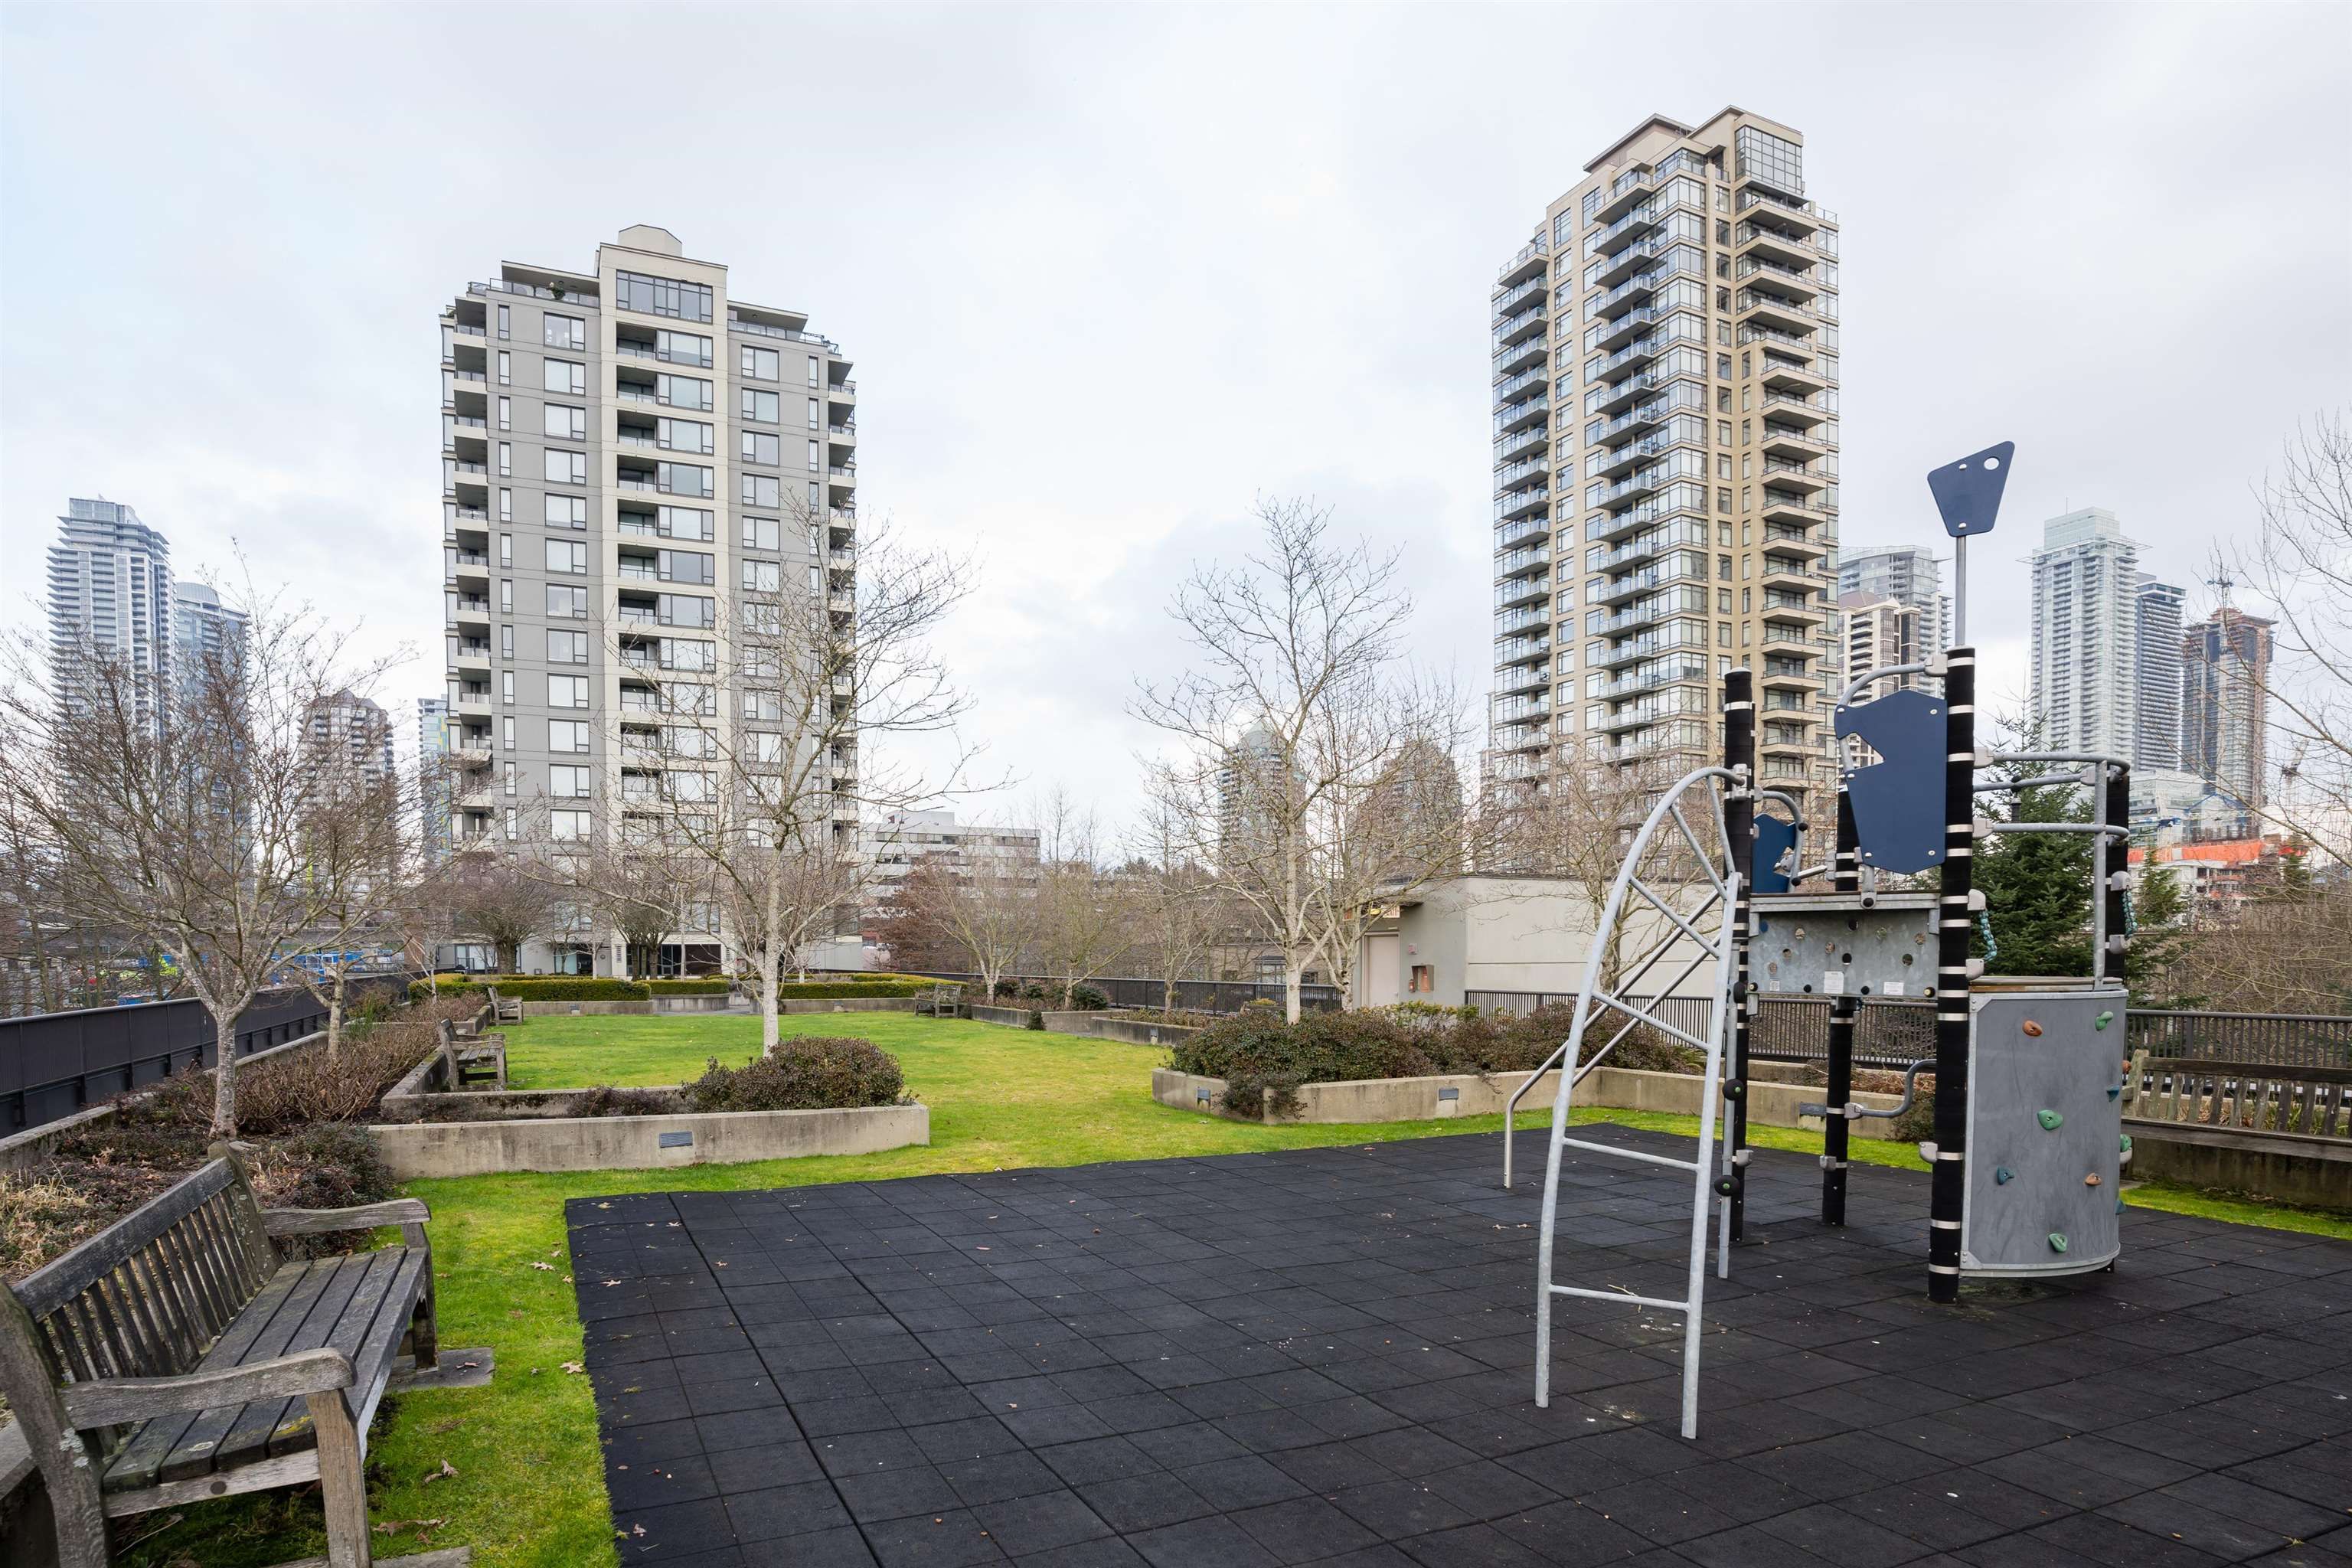 Photo 11: Photos: 1805 4182 DAWSON STREET in Burnaby: Brentwood Park Condo for sale (Burnaby North)  : MLS®# R2667648